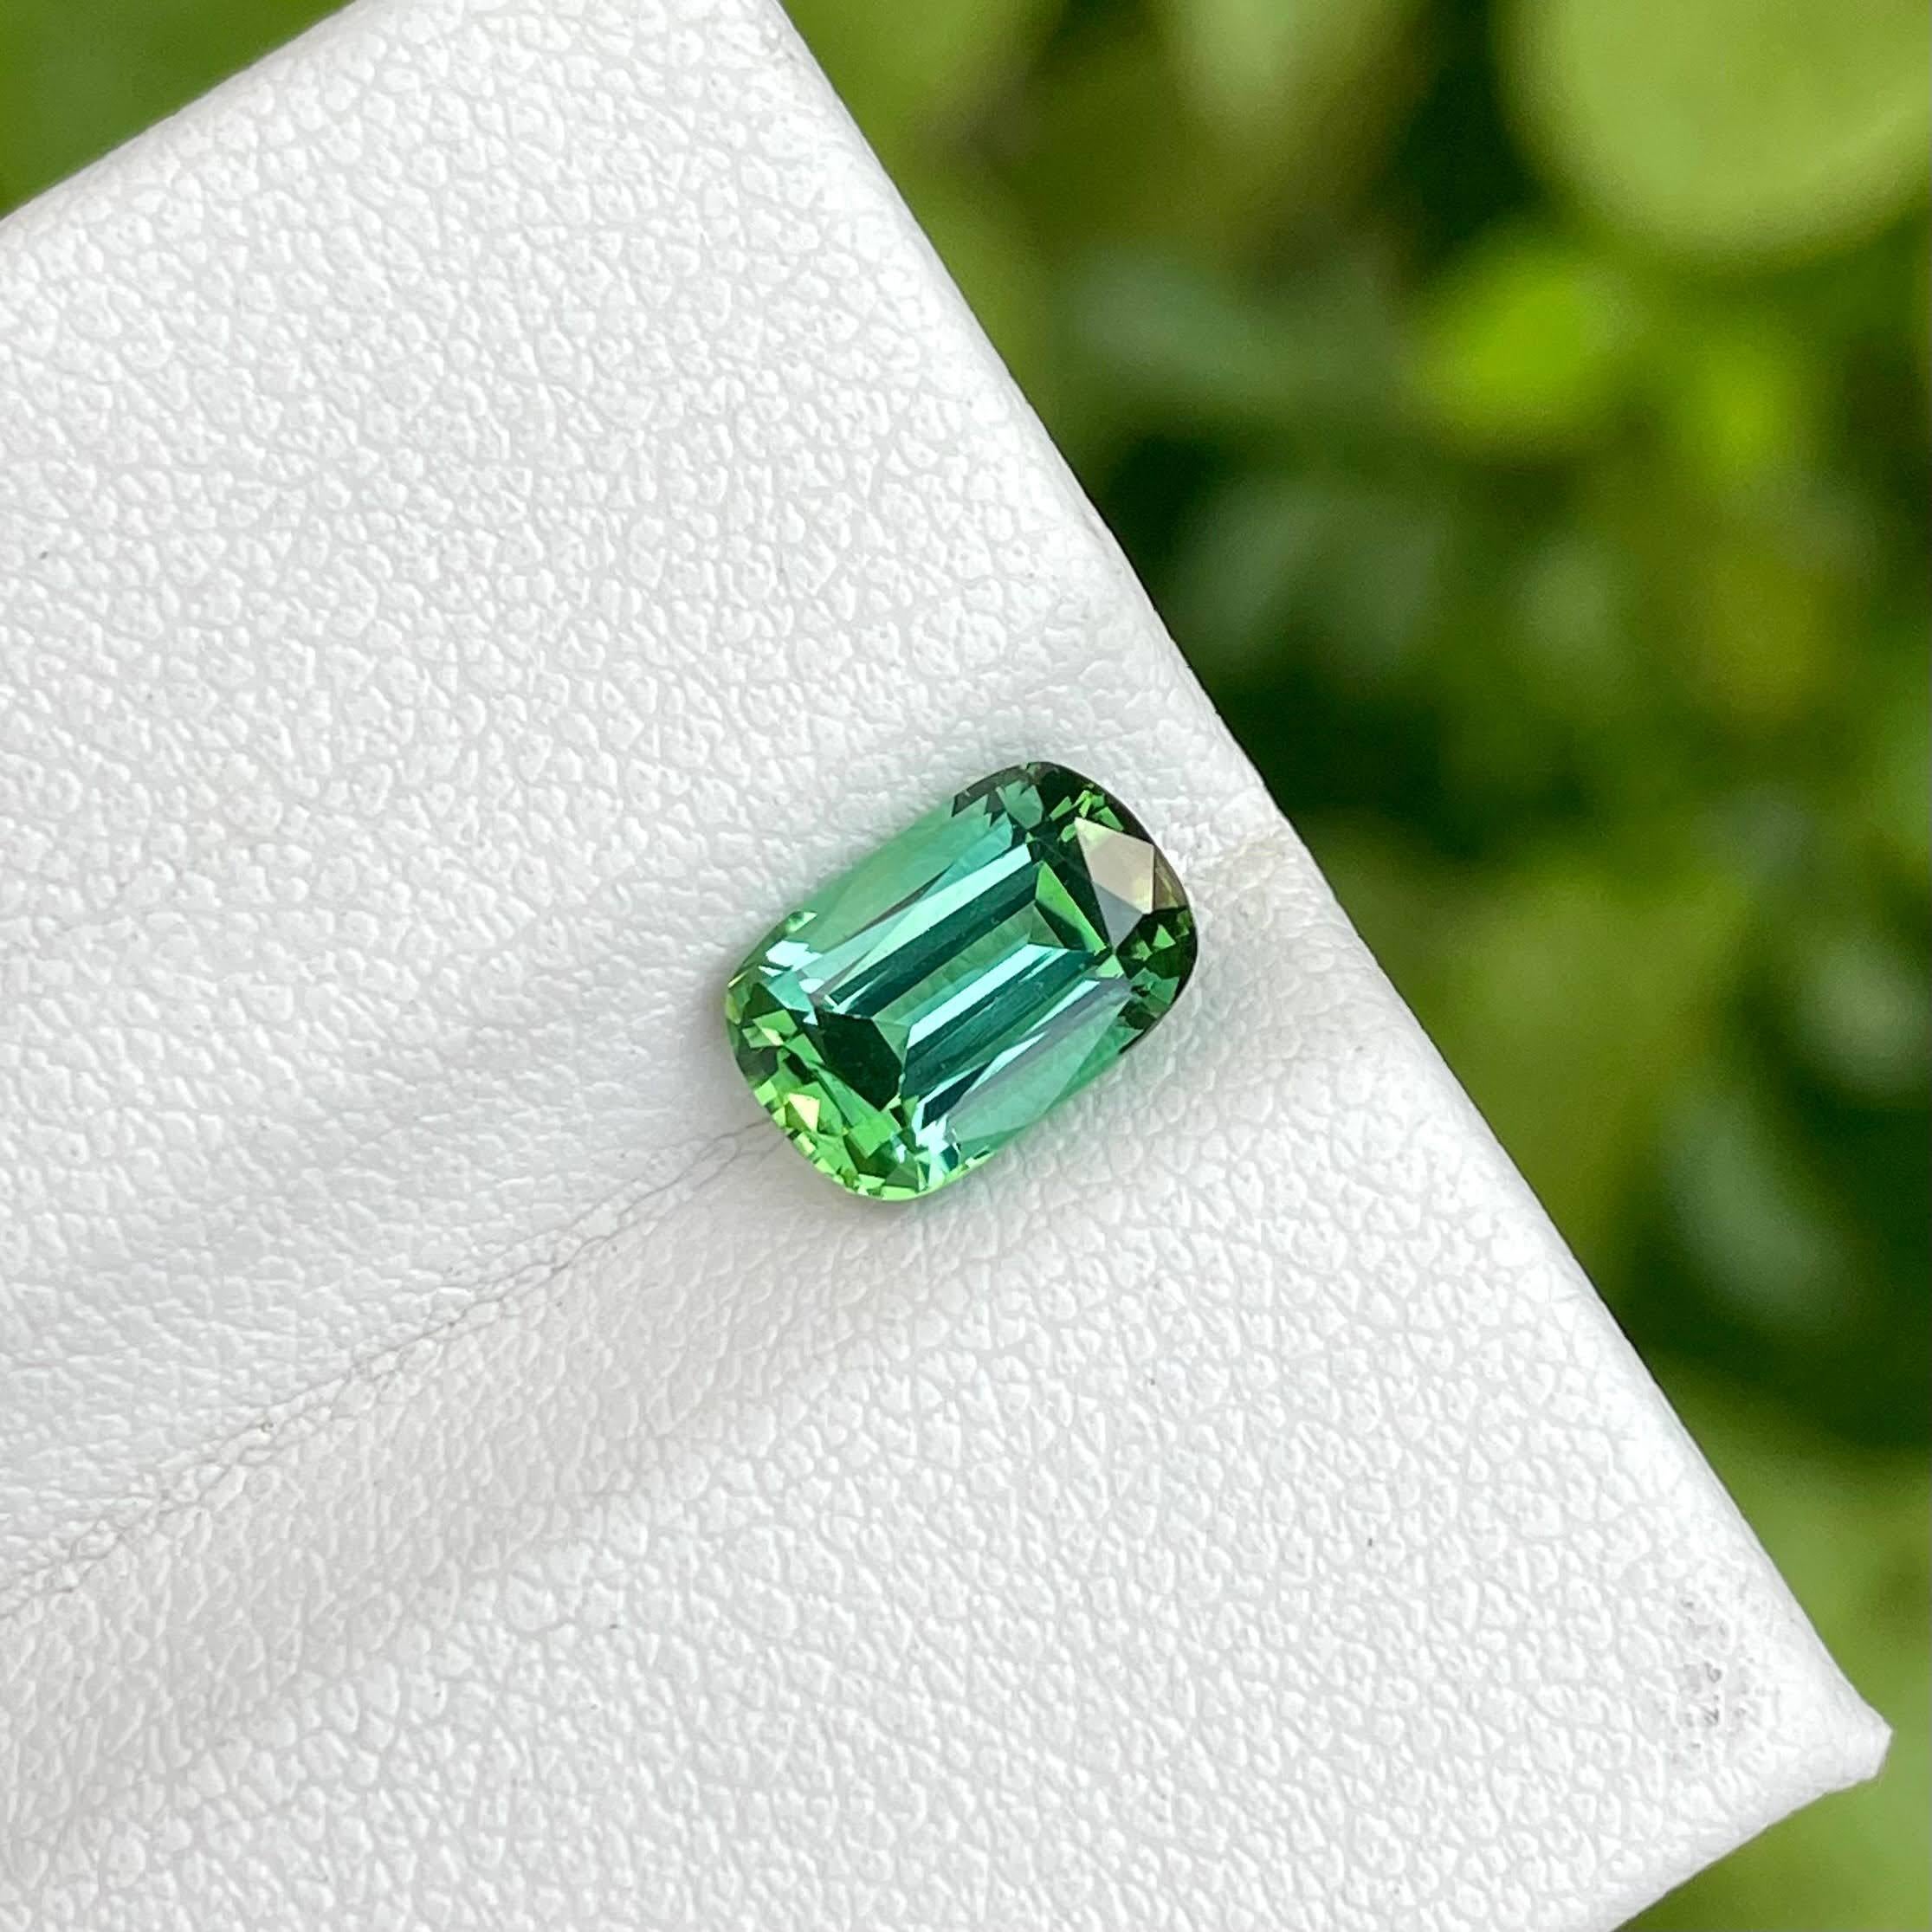 Weight 1.70 carats 
Dimensions 8.6x5.7x4.6 mm
Treatment none 
Origin Afghanistan 
Clarity eye clean 
Shape cushion 
Cut Cushion 



The 1.75 carat Mint Green Tourmaline stone, meticulously cut into a cushion shape, is a striking example of Afghan